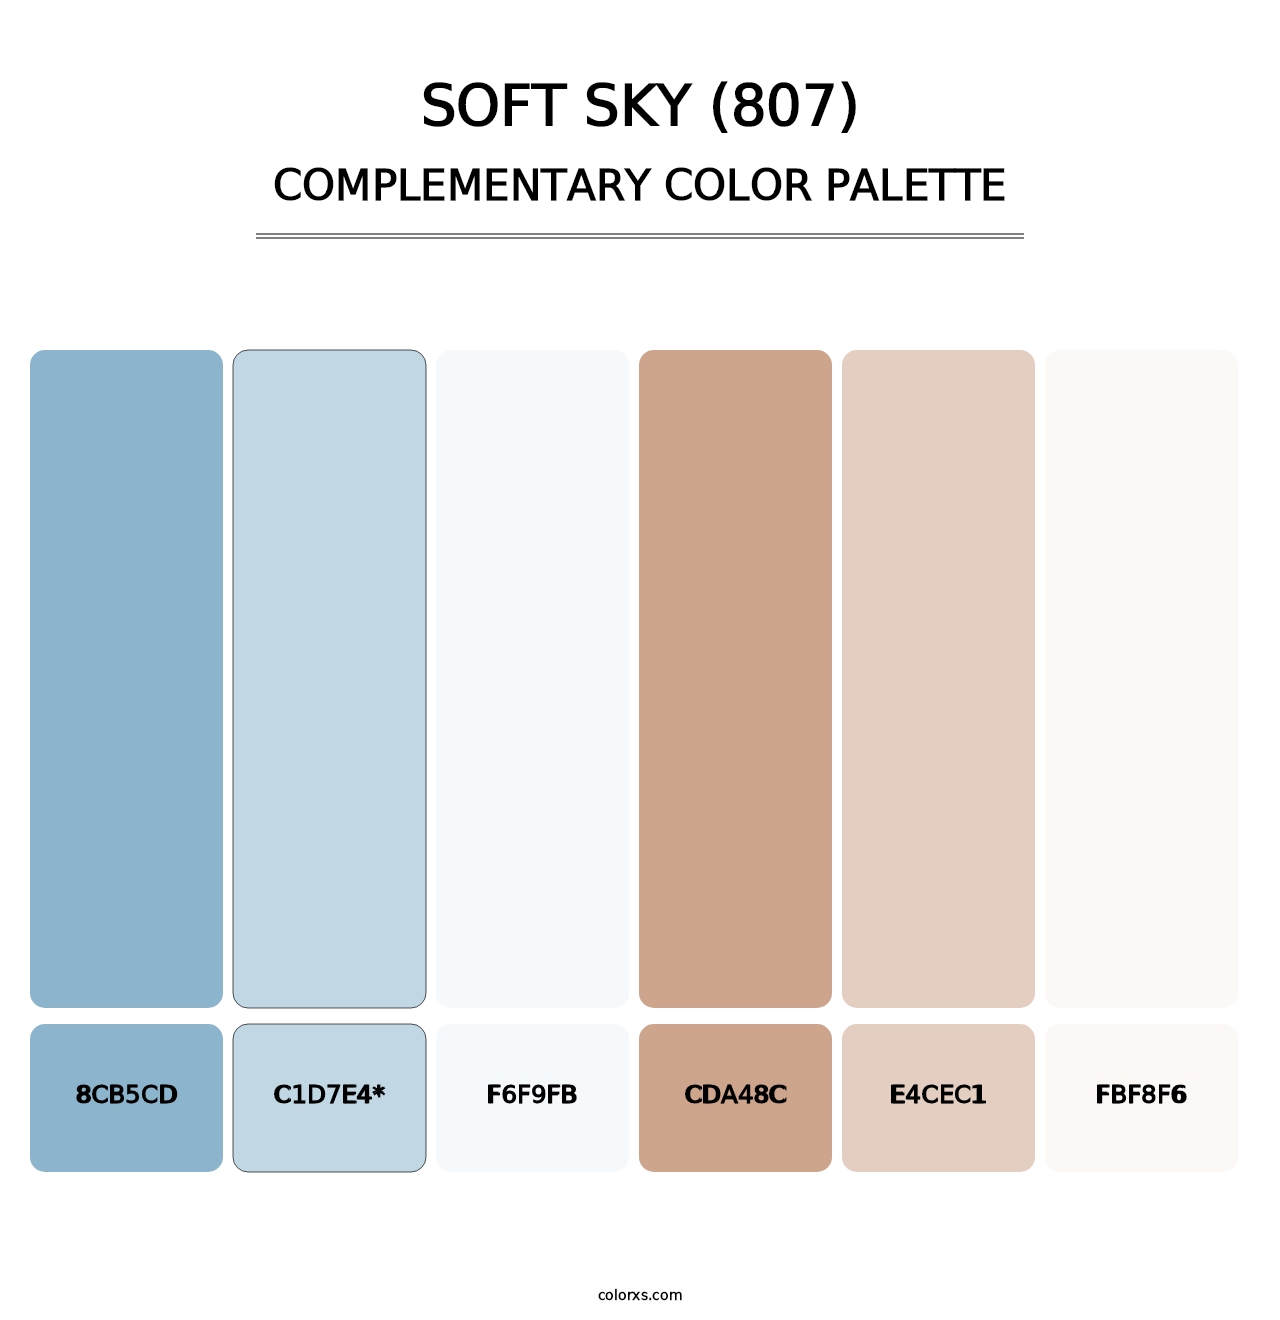 Soft Sky (807) - Complementary Color Palette